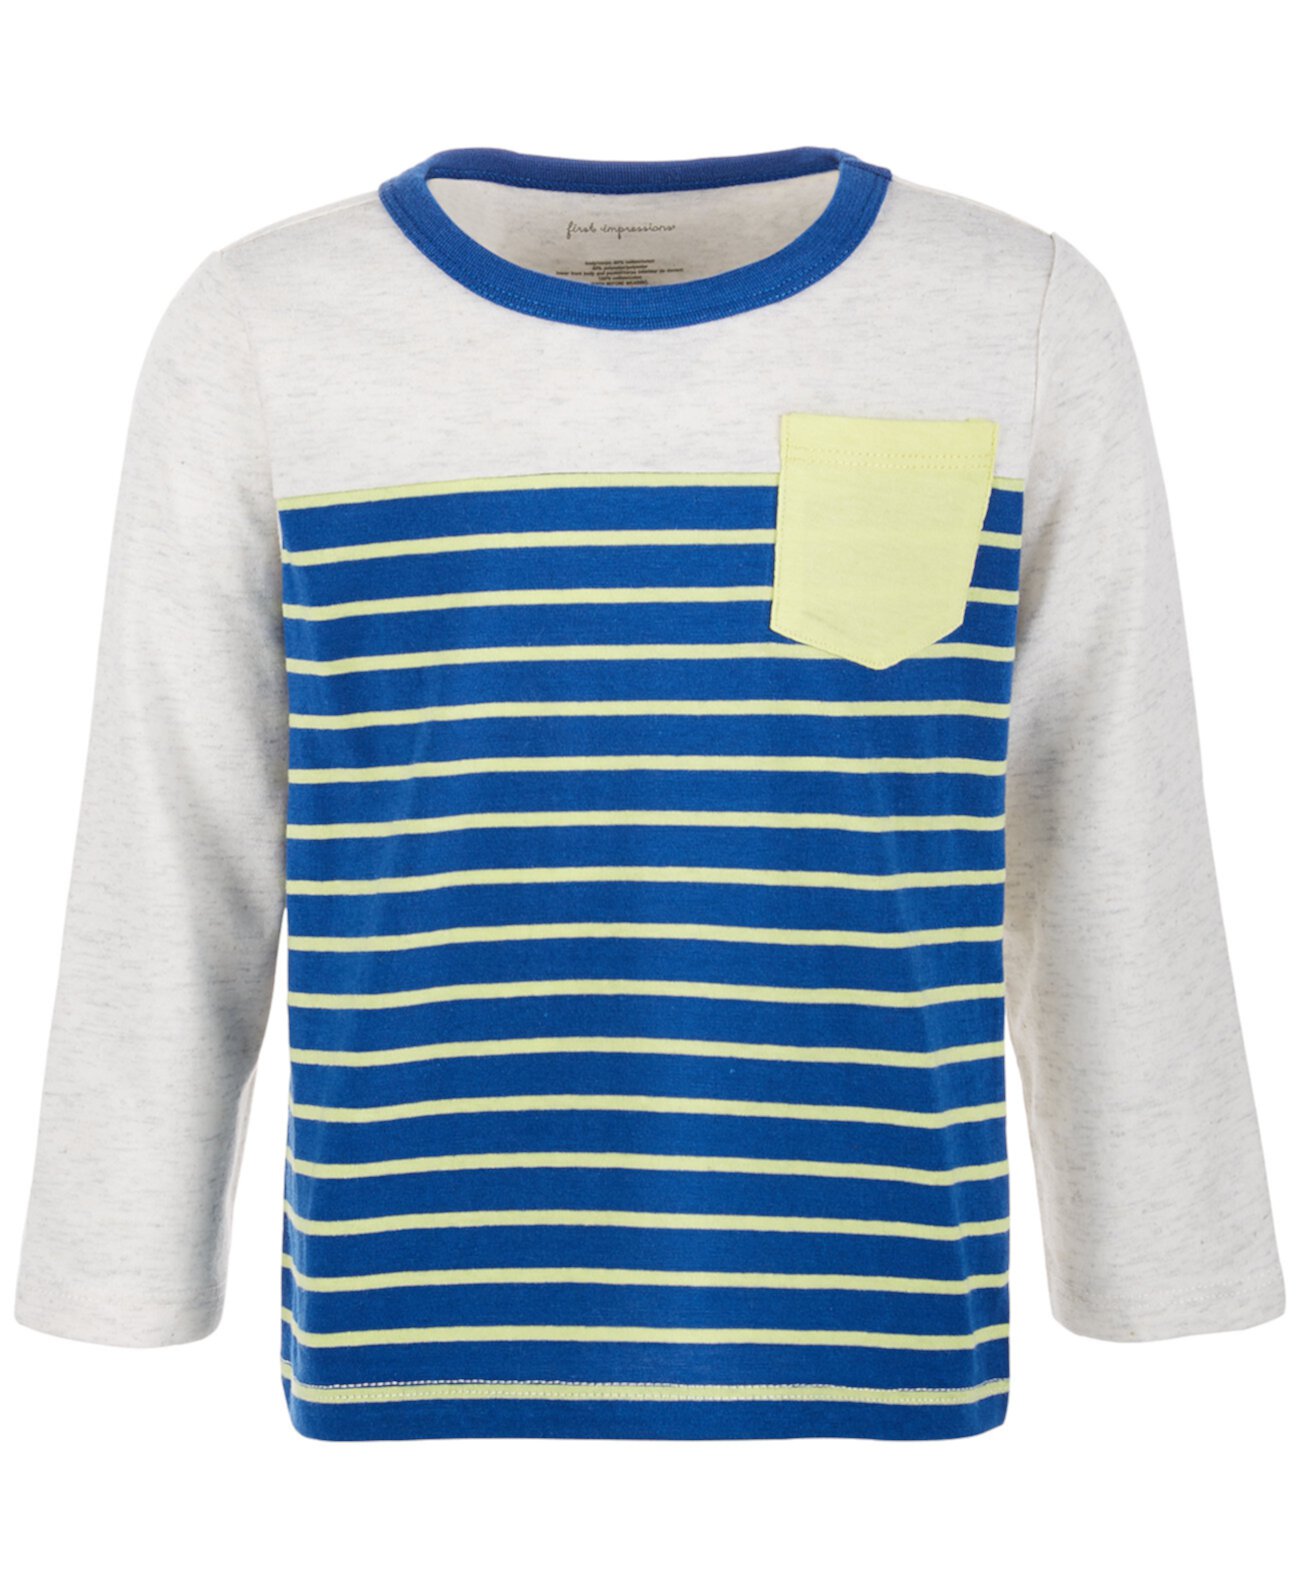 Toddler Boys Stripe Pieced Pocket Long-Sleeve T-Shirt, Created for Macy's First Impressions